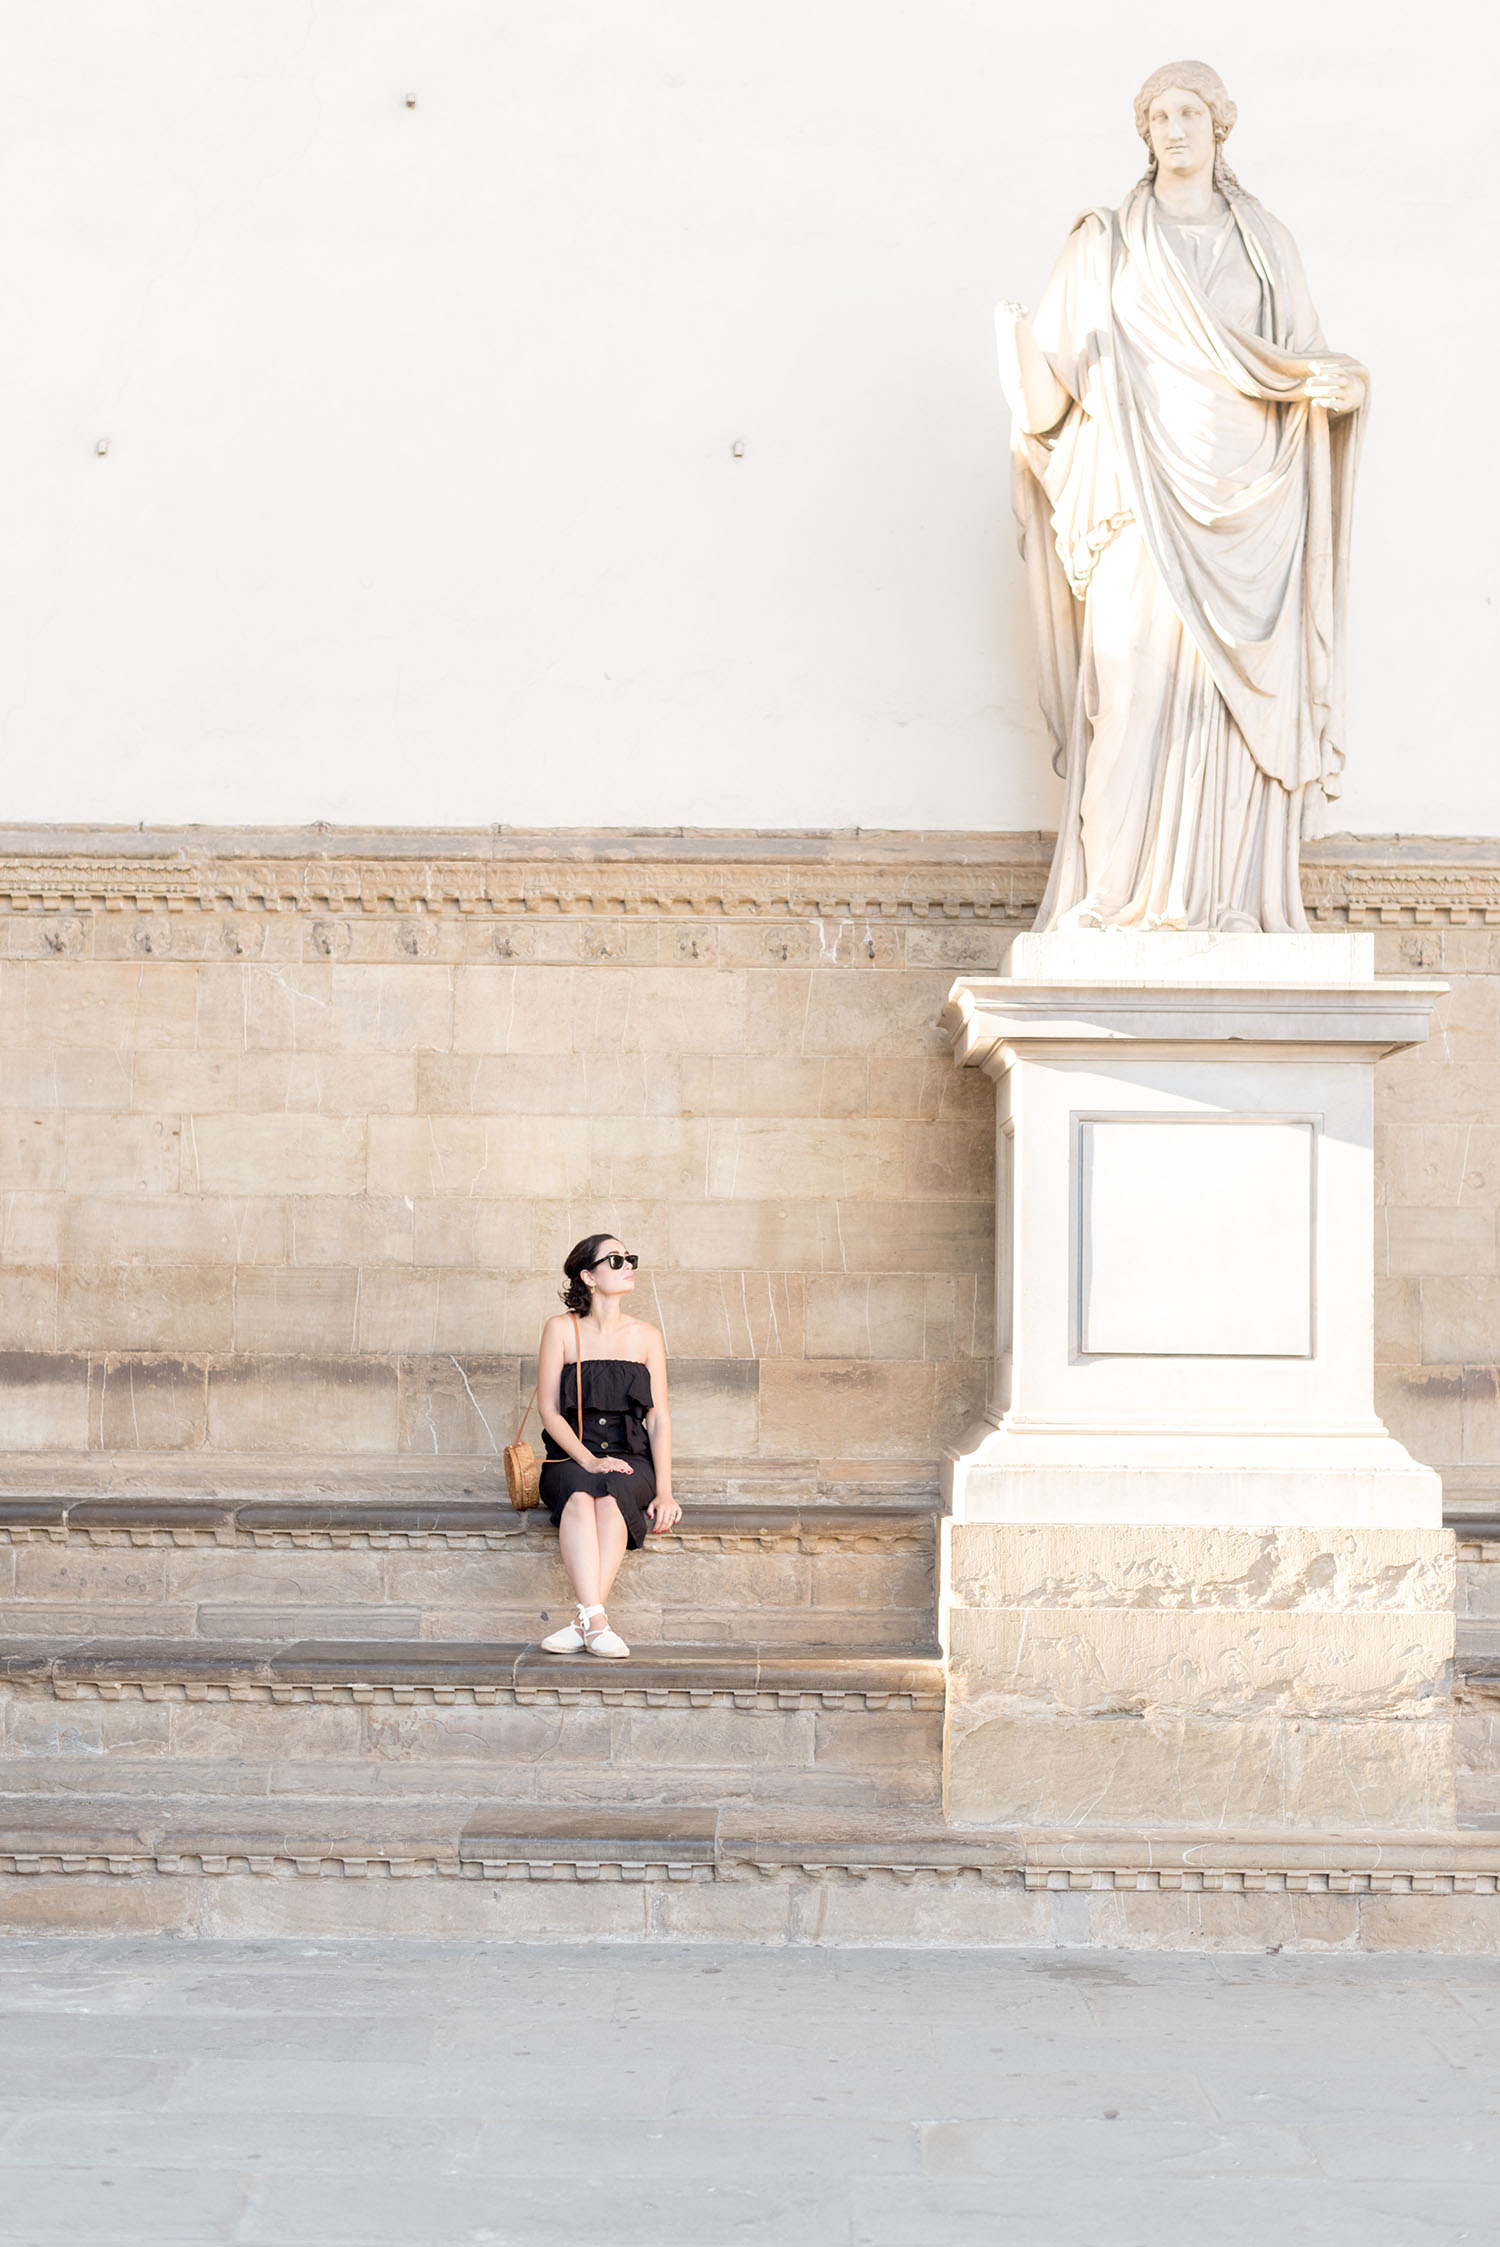 Top Canadian fashion blogger Cee Fardoe of Coco & Vera sits at the Uffizi Gallery wearing a ShopUniques dress and carrying an Ellen James handbag